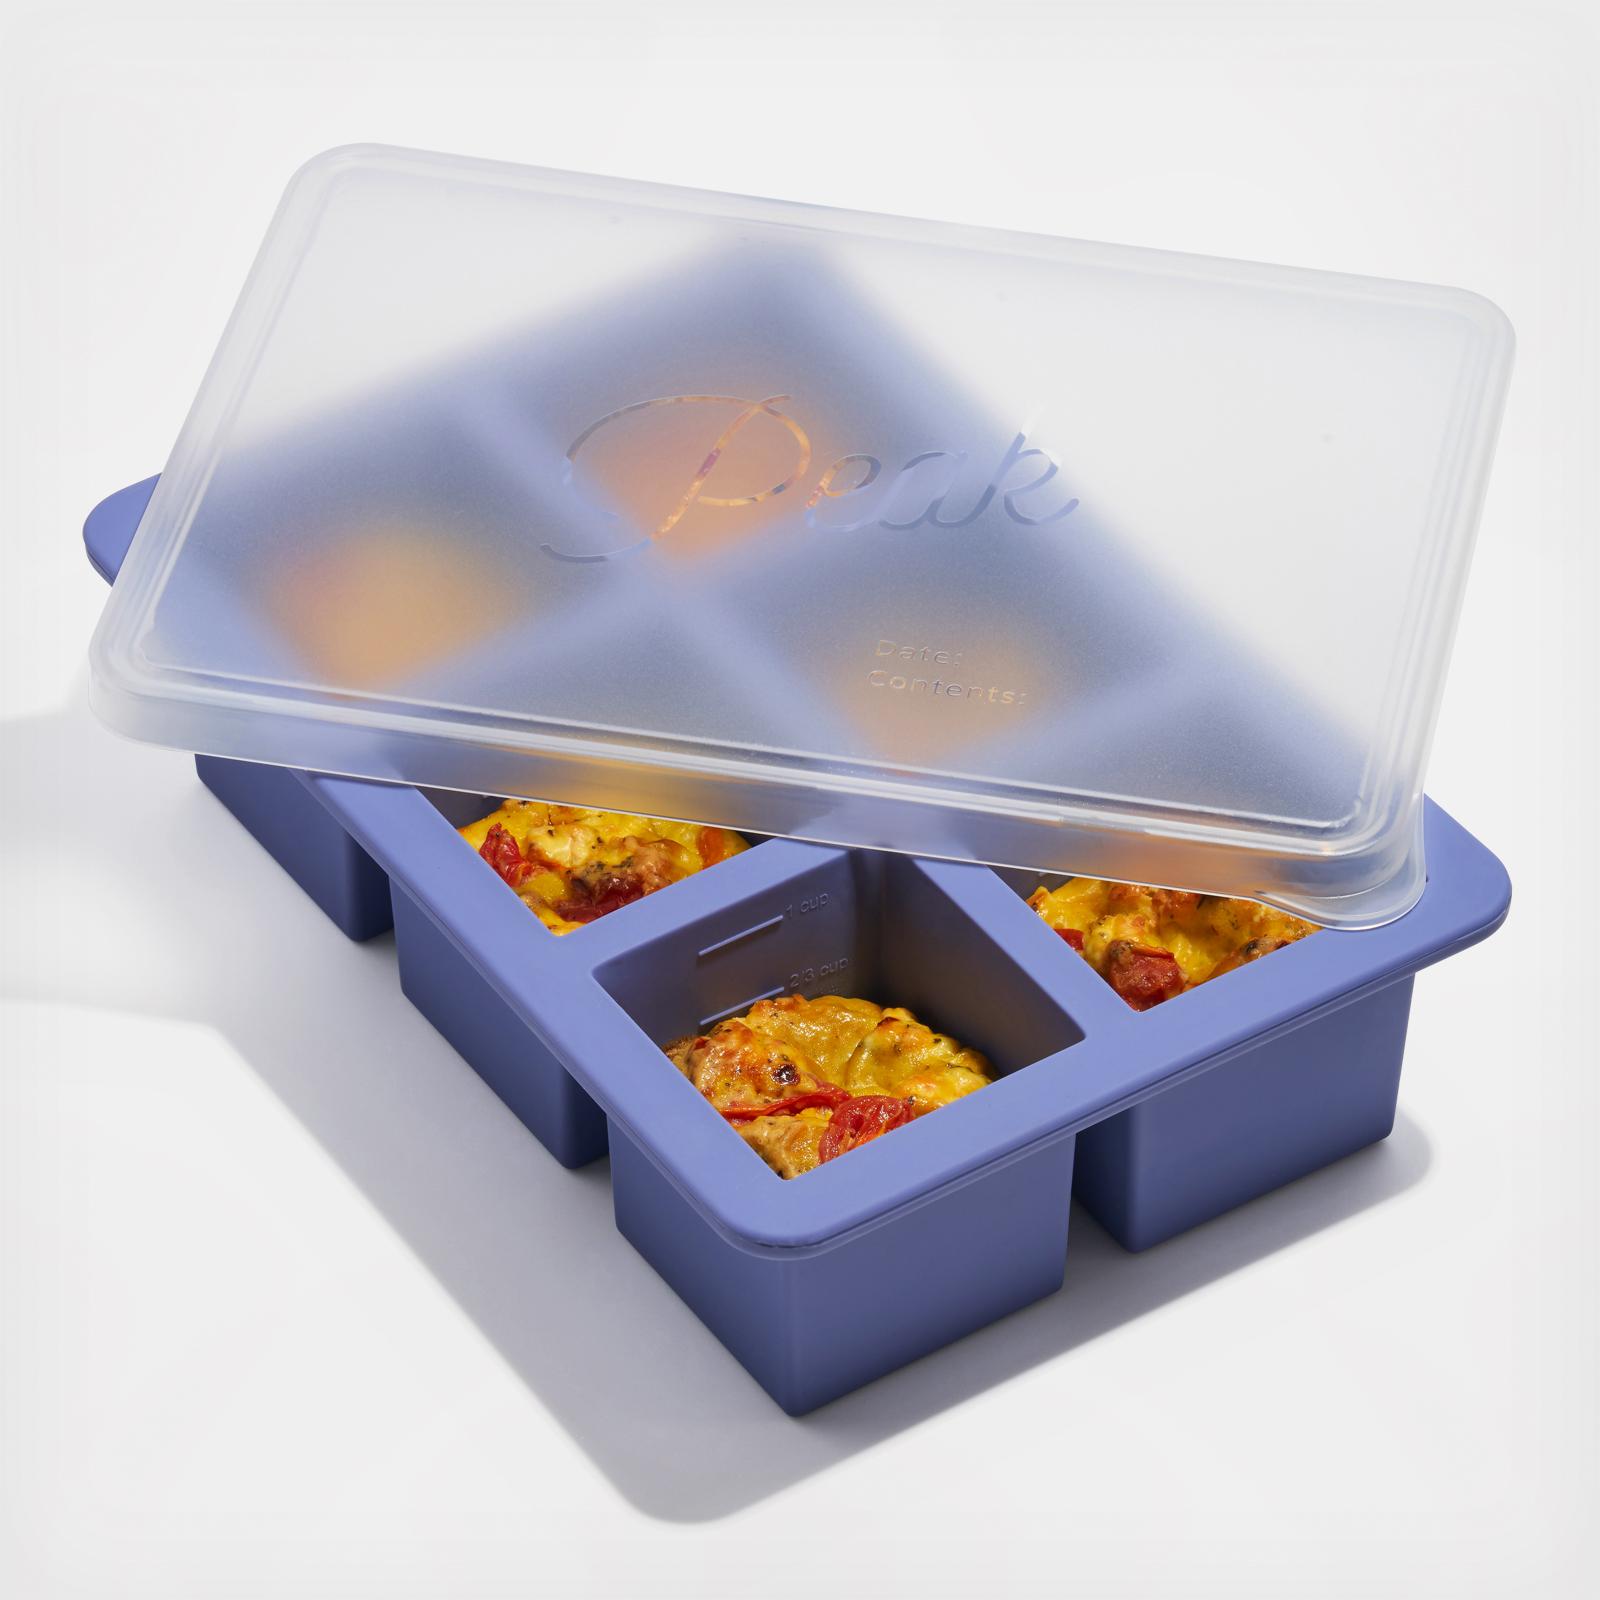 W&P Cup Cubes Freezer Tray - 4 Cubes, Charcoal